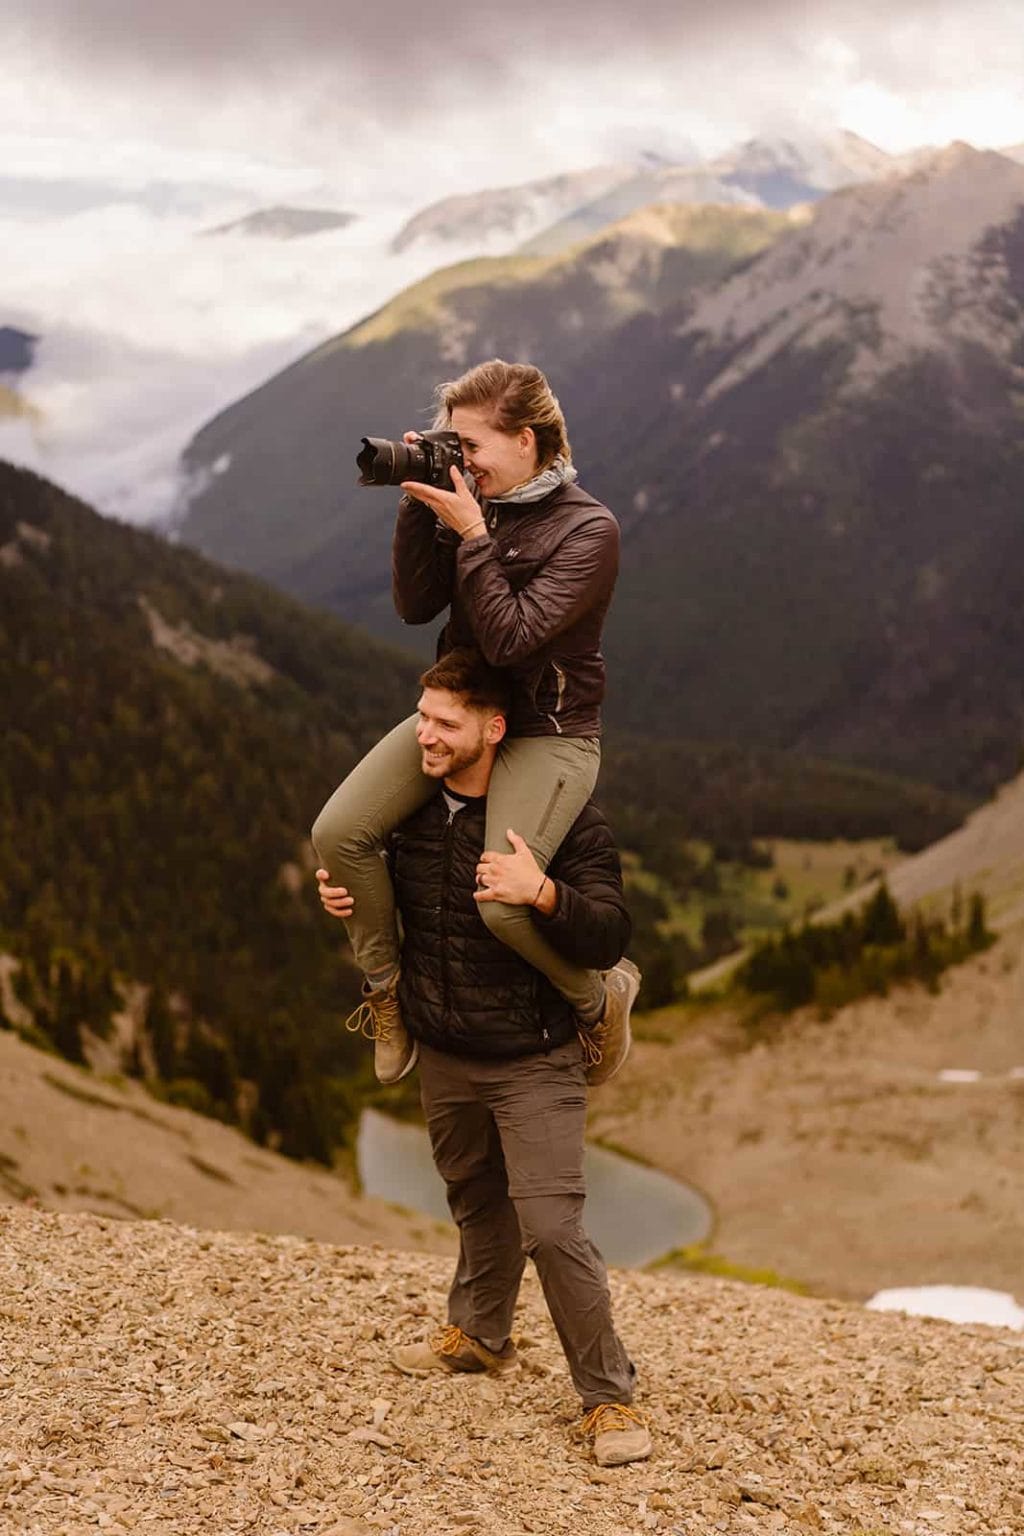 A man holds a woman on his shoulders as she photographs something while mountain views are visible behind them.